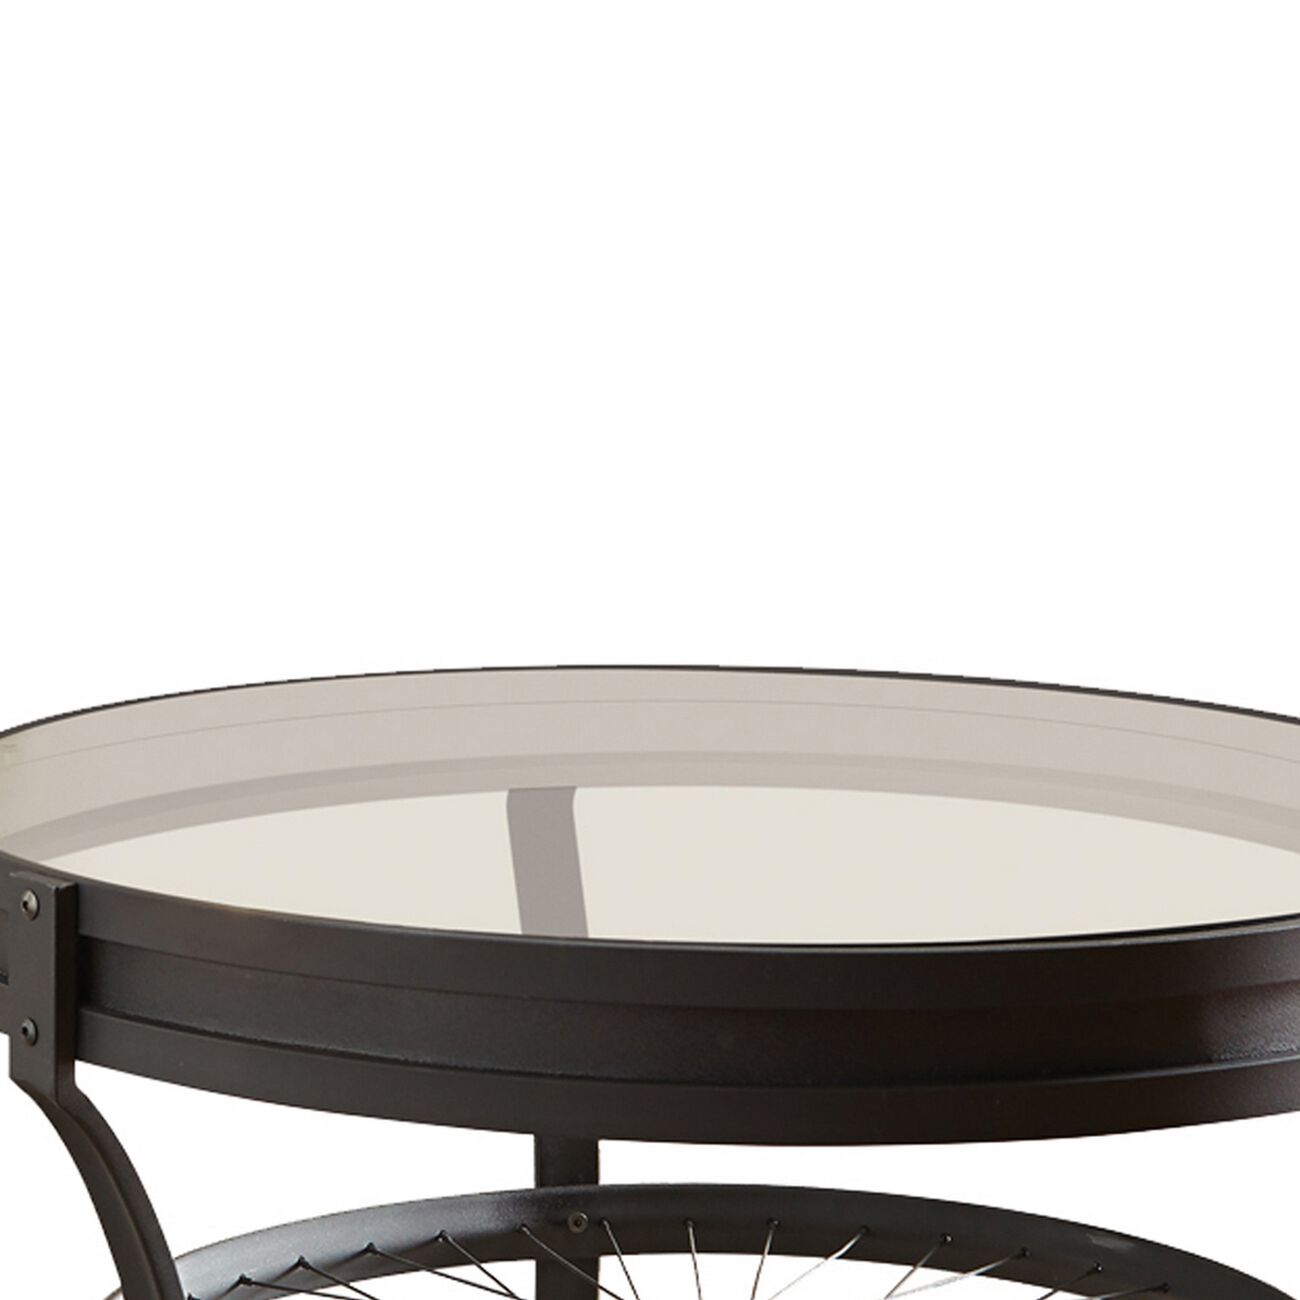 Glass Top Metal Coffee Table with Bike Spokes Design Bottom,Black and Clear